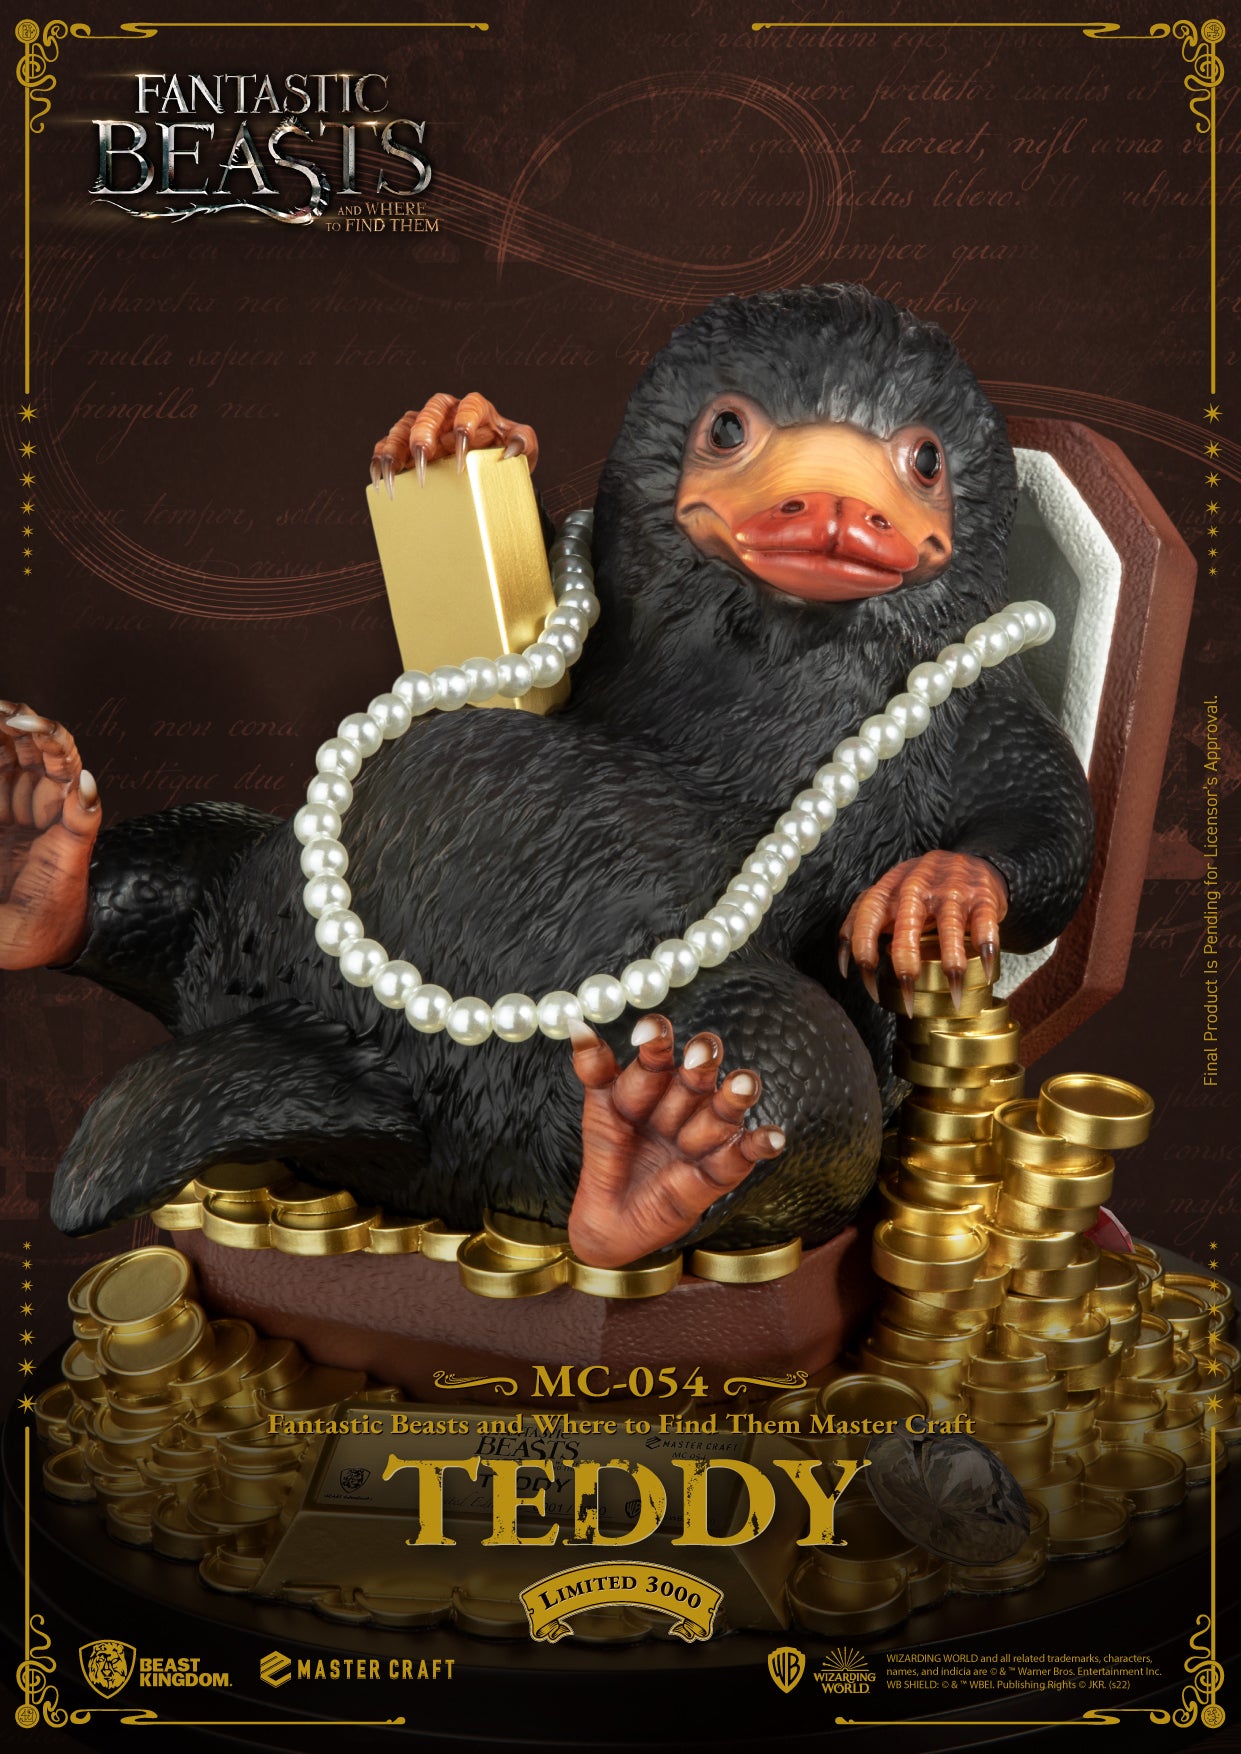 WARNER BROS Fantastic Beasts And Where To Find Them Master Craft Teddy (Master Craft)